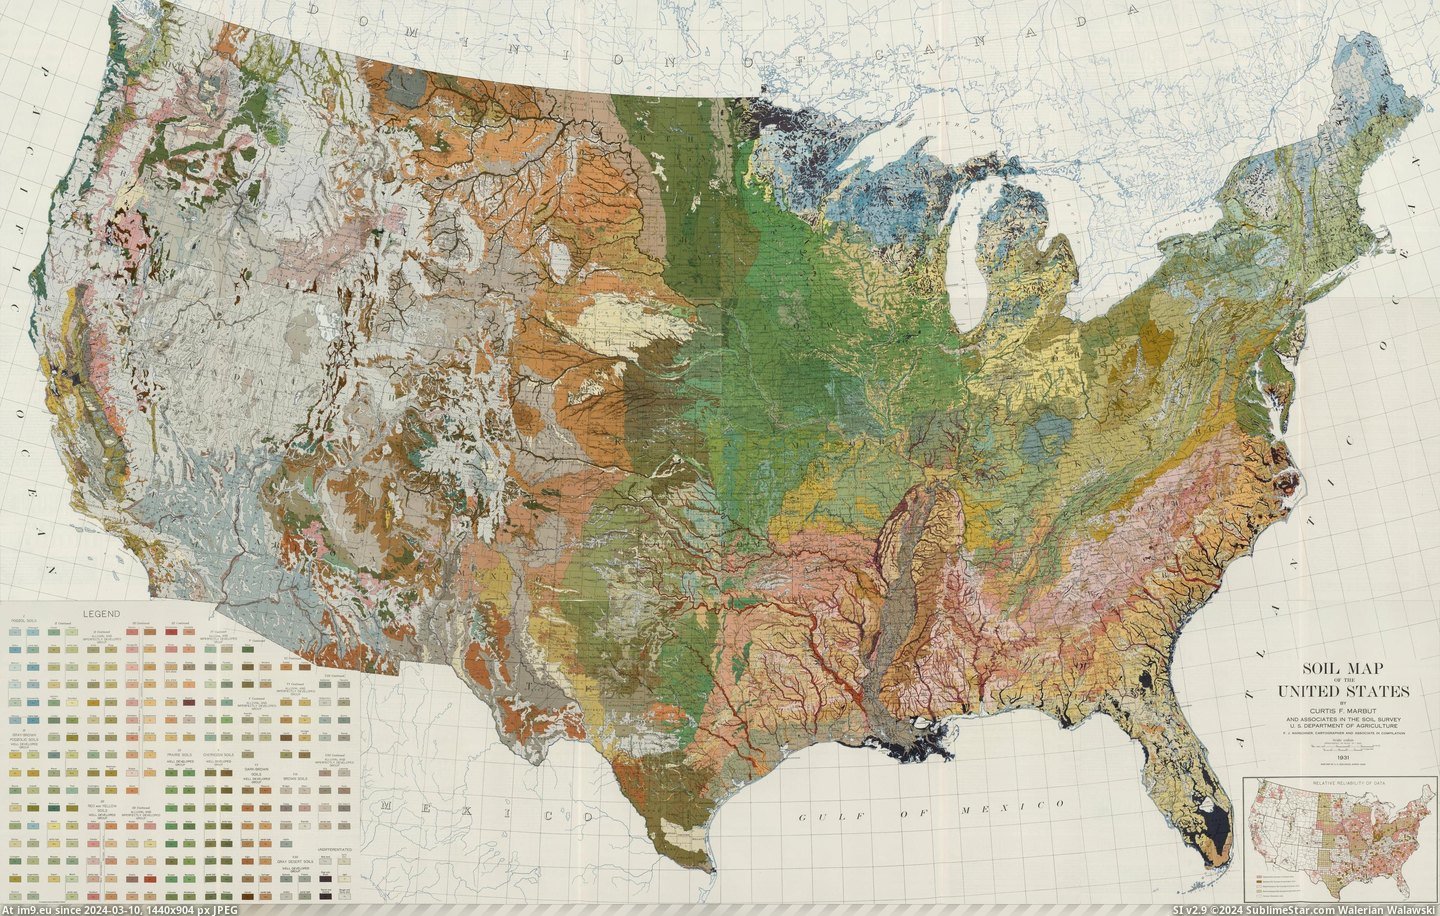 #Map #American #Atlas #Soil #Agriculture #States #United [Mapporn] Soil Map of the United States, from the Atlas of American Agriculture (1931) [3686x2327] Pic. (Изображение из альбом My r/MAPS favs))